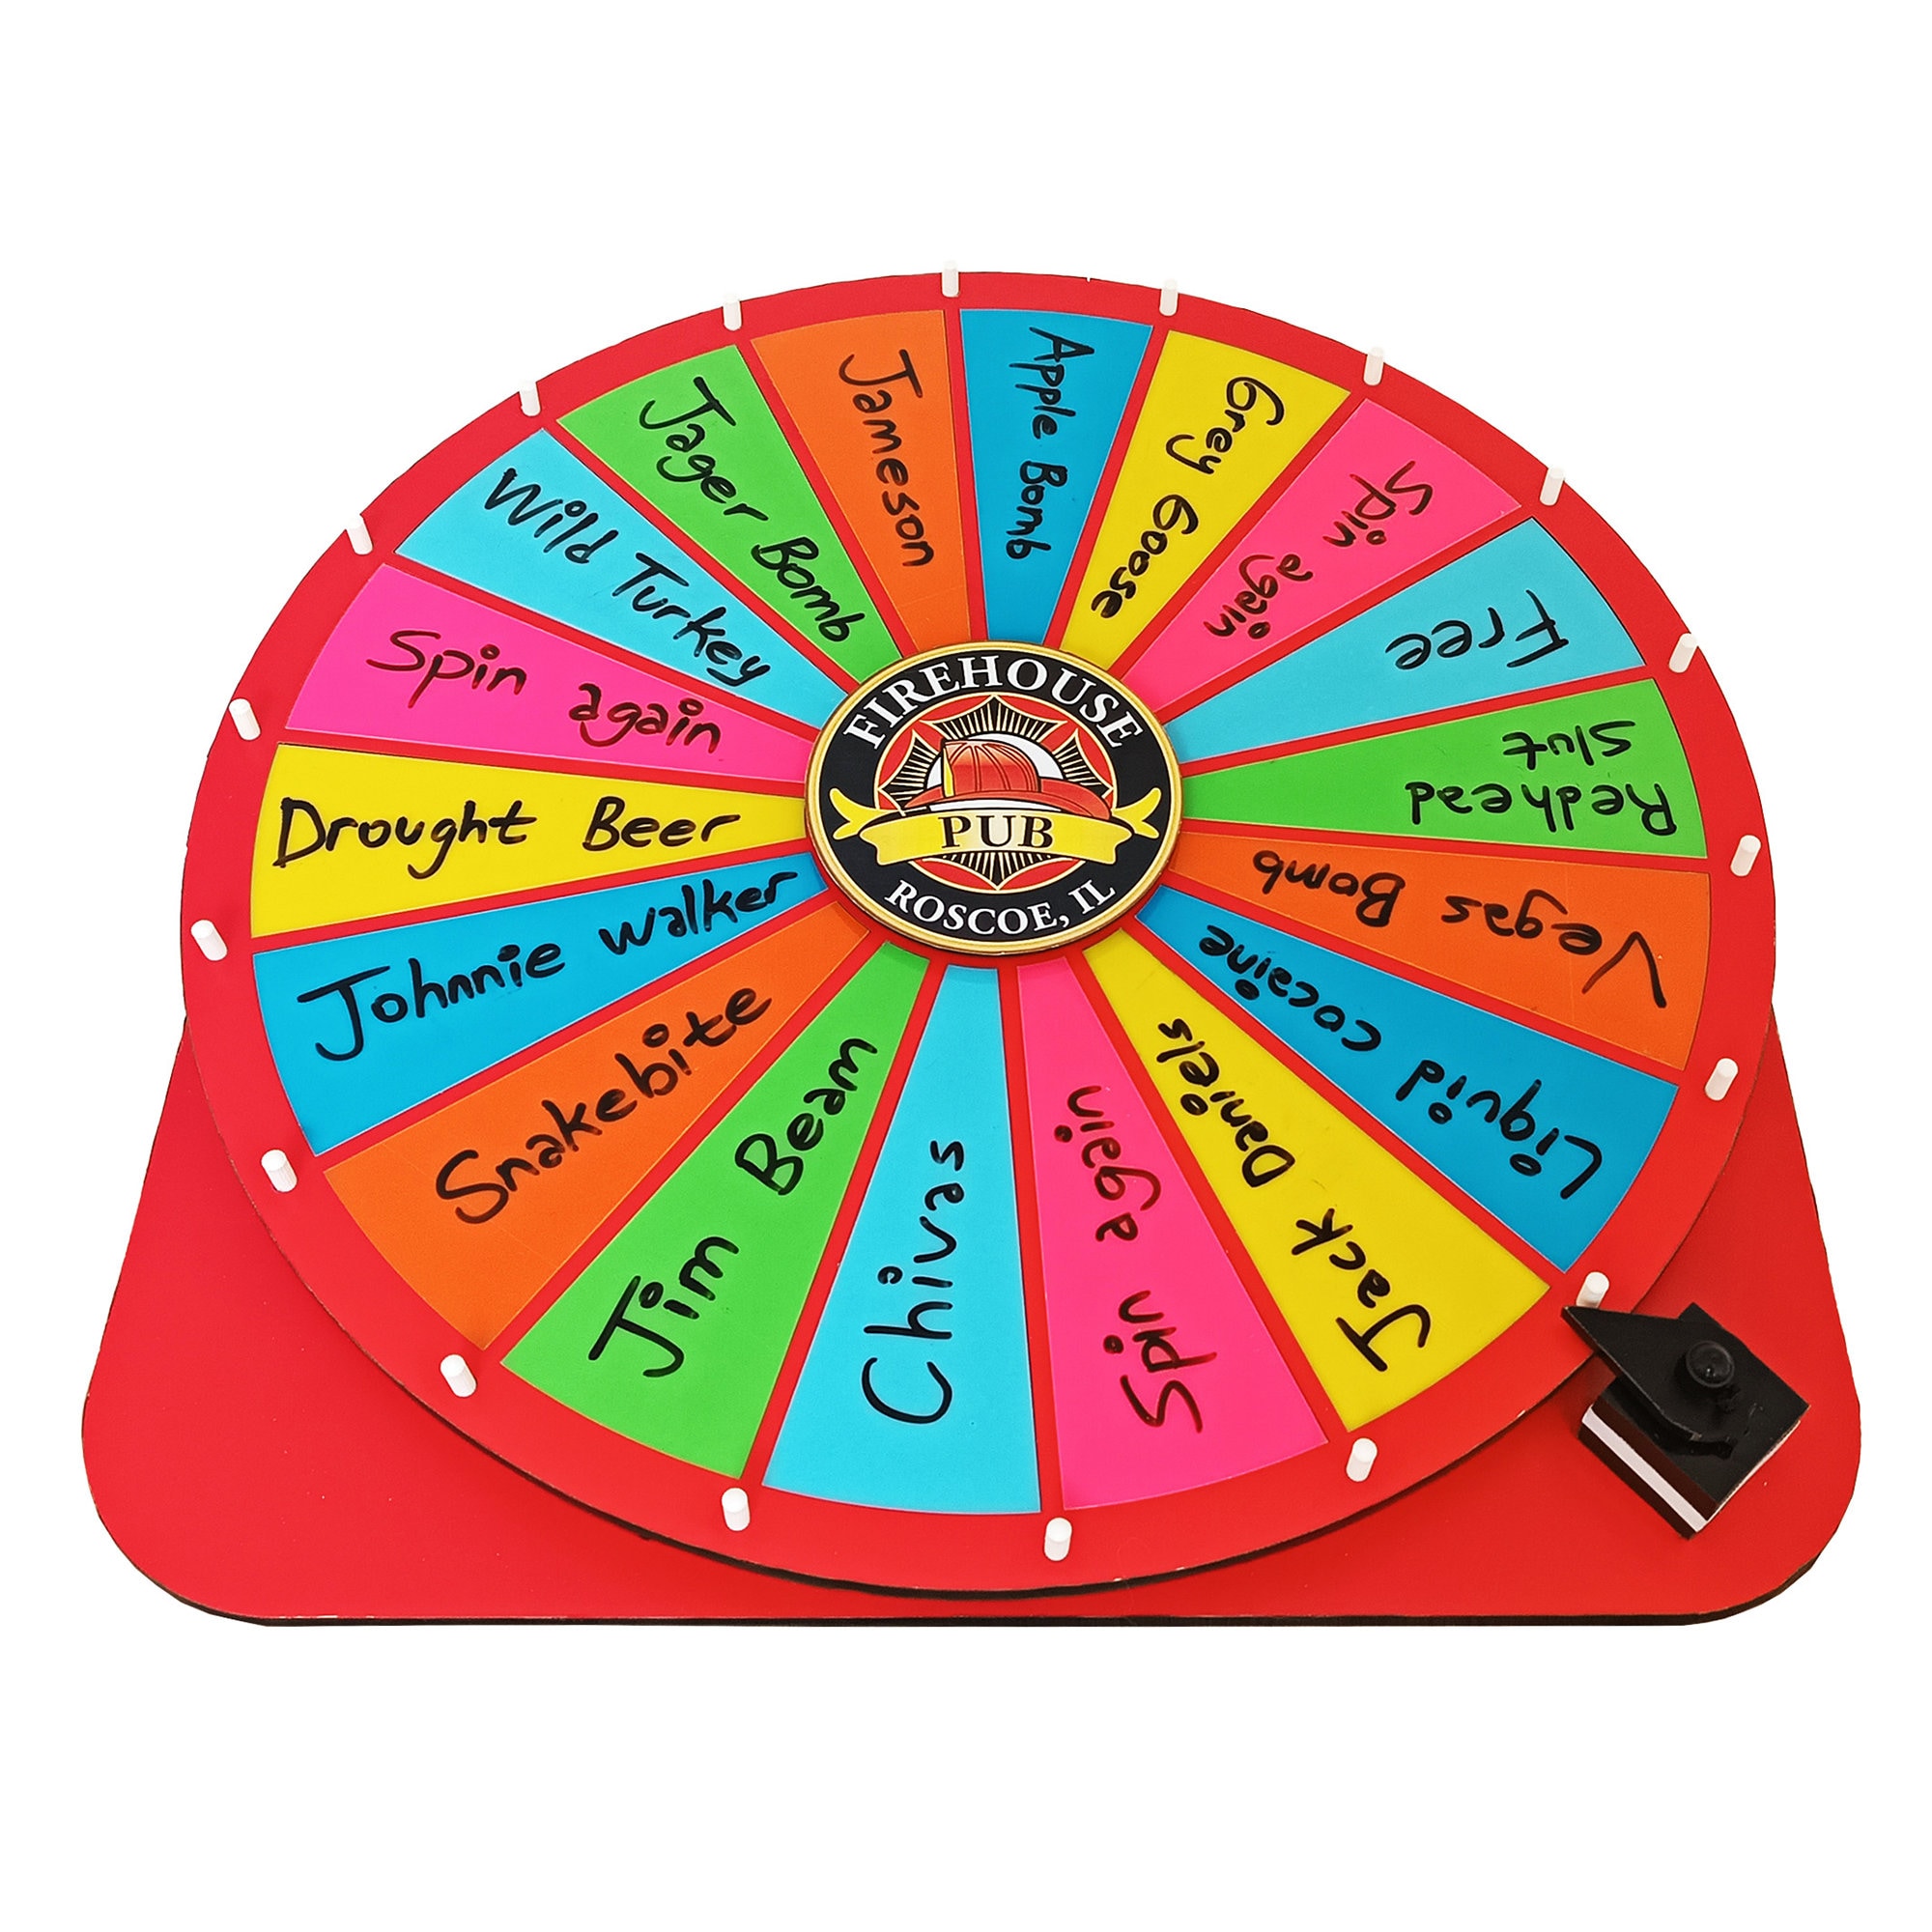 Personalized Birthday Party Games, Board Games, Wooden Spin the Wheel Game  With Custom Ideas, Christmas Dry Erase Wheel, Wedding Games 